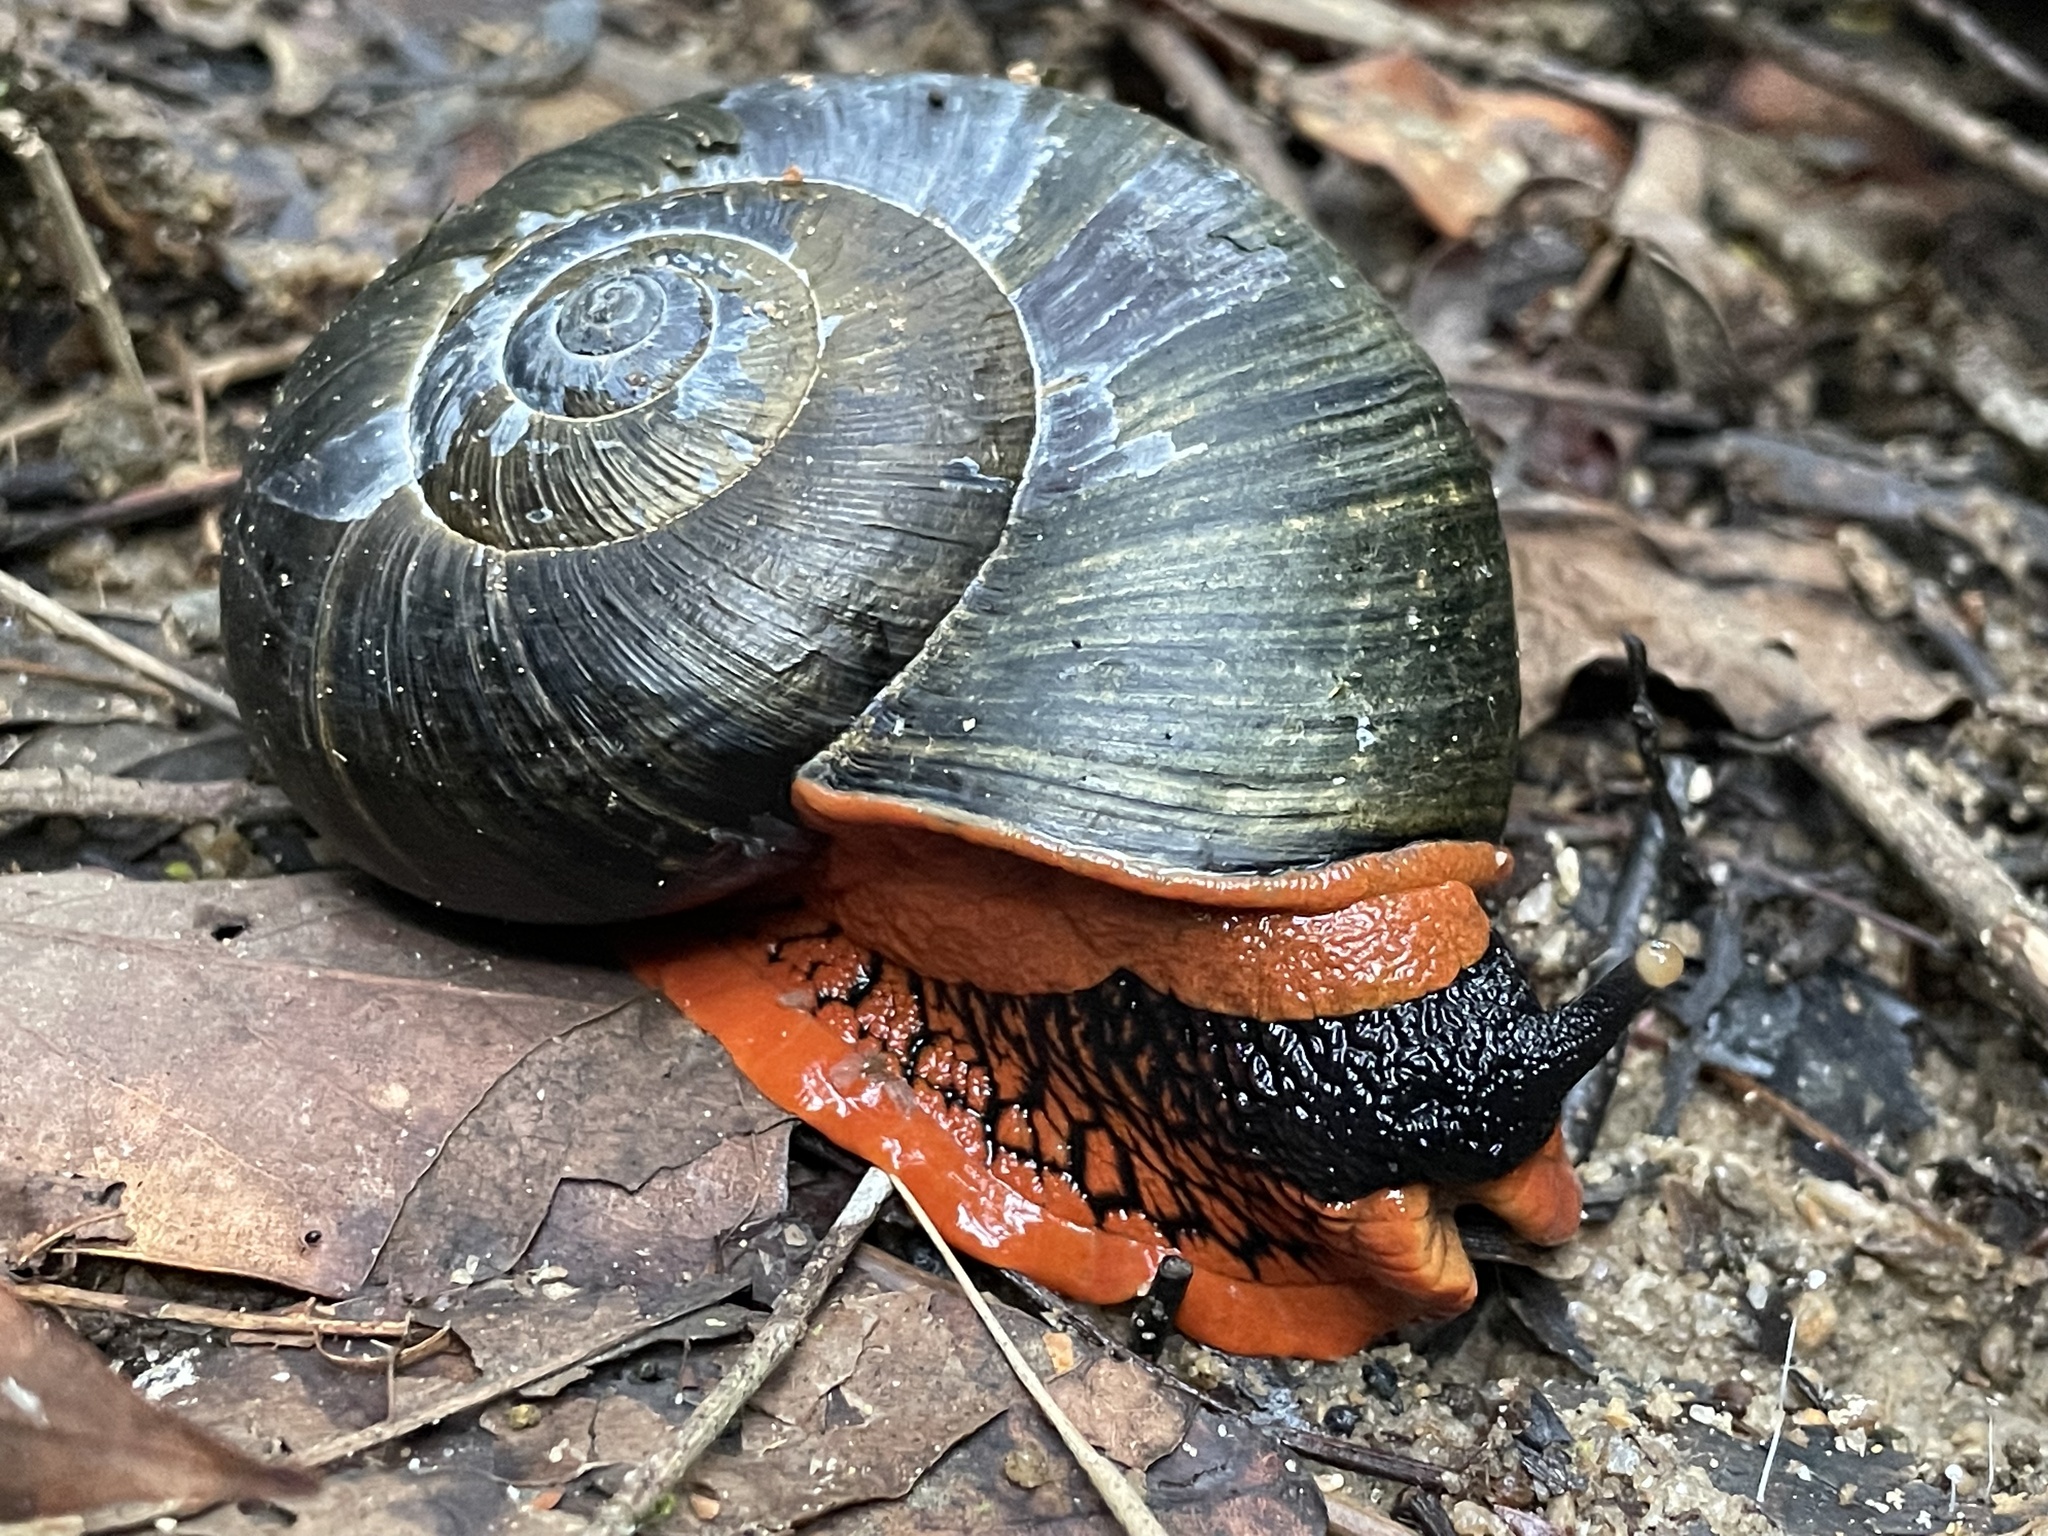 Capricorn Farms Ltd. - Malaysia's giant fire snail! In red and black,  attracts fear  well here it is scientifically named Platymma tweediei, a  snail endemic to Malaysian mountain forests🇲🇾